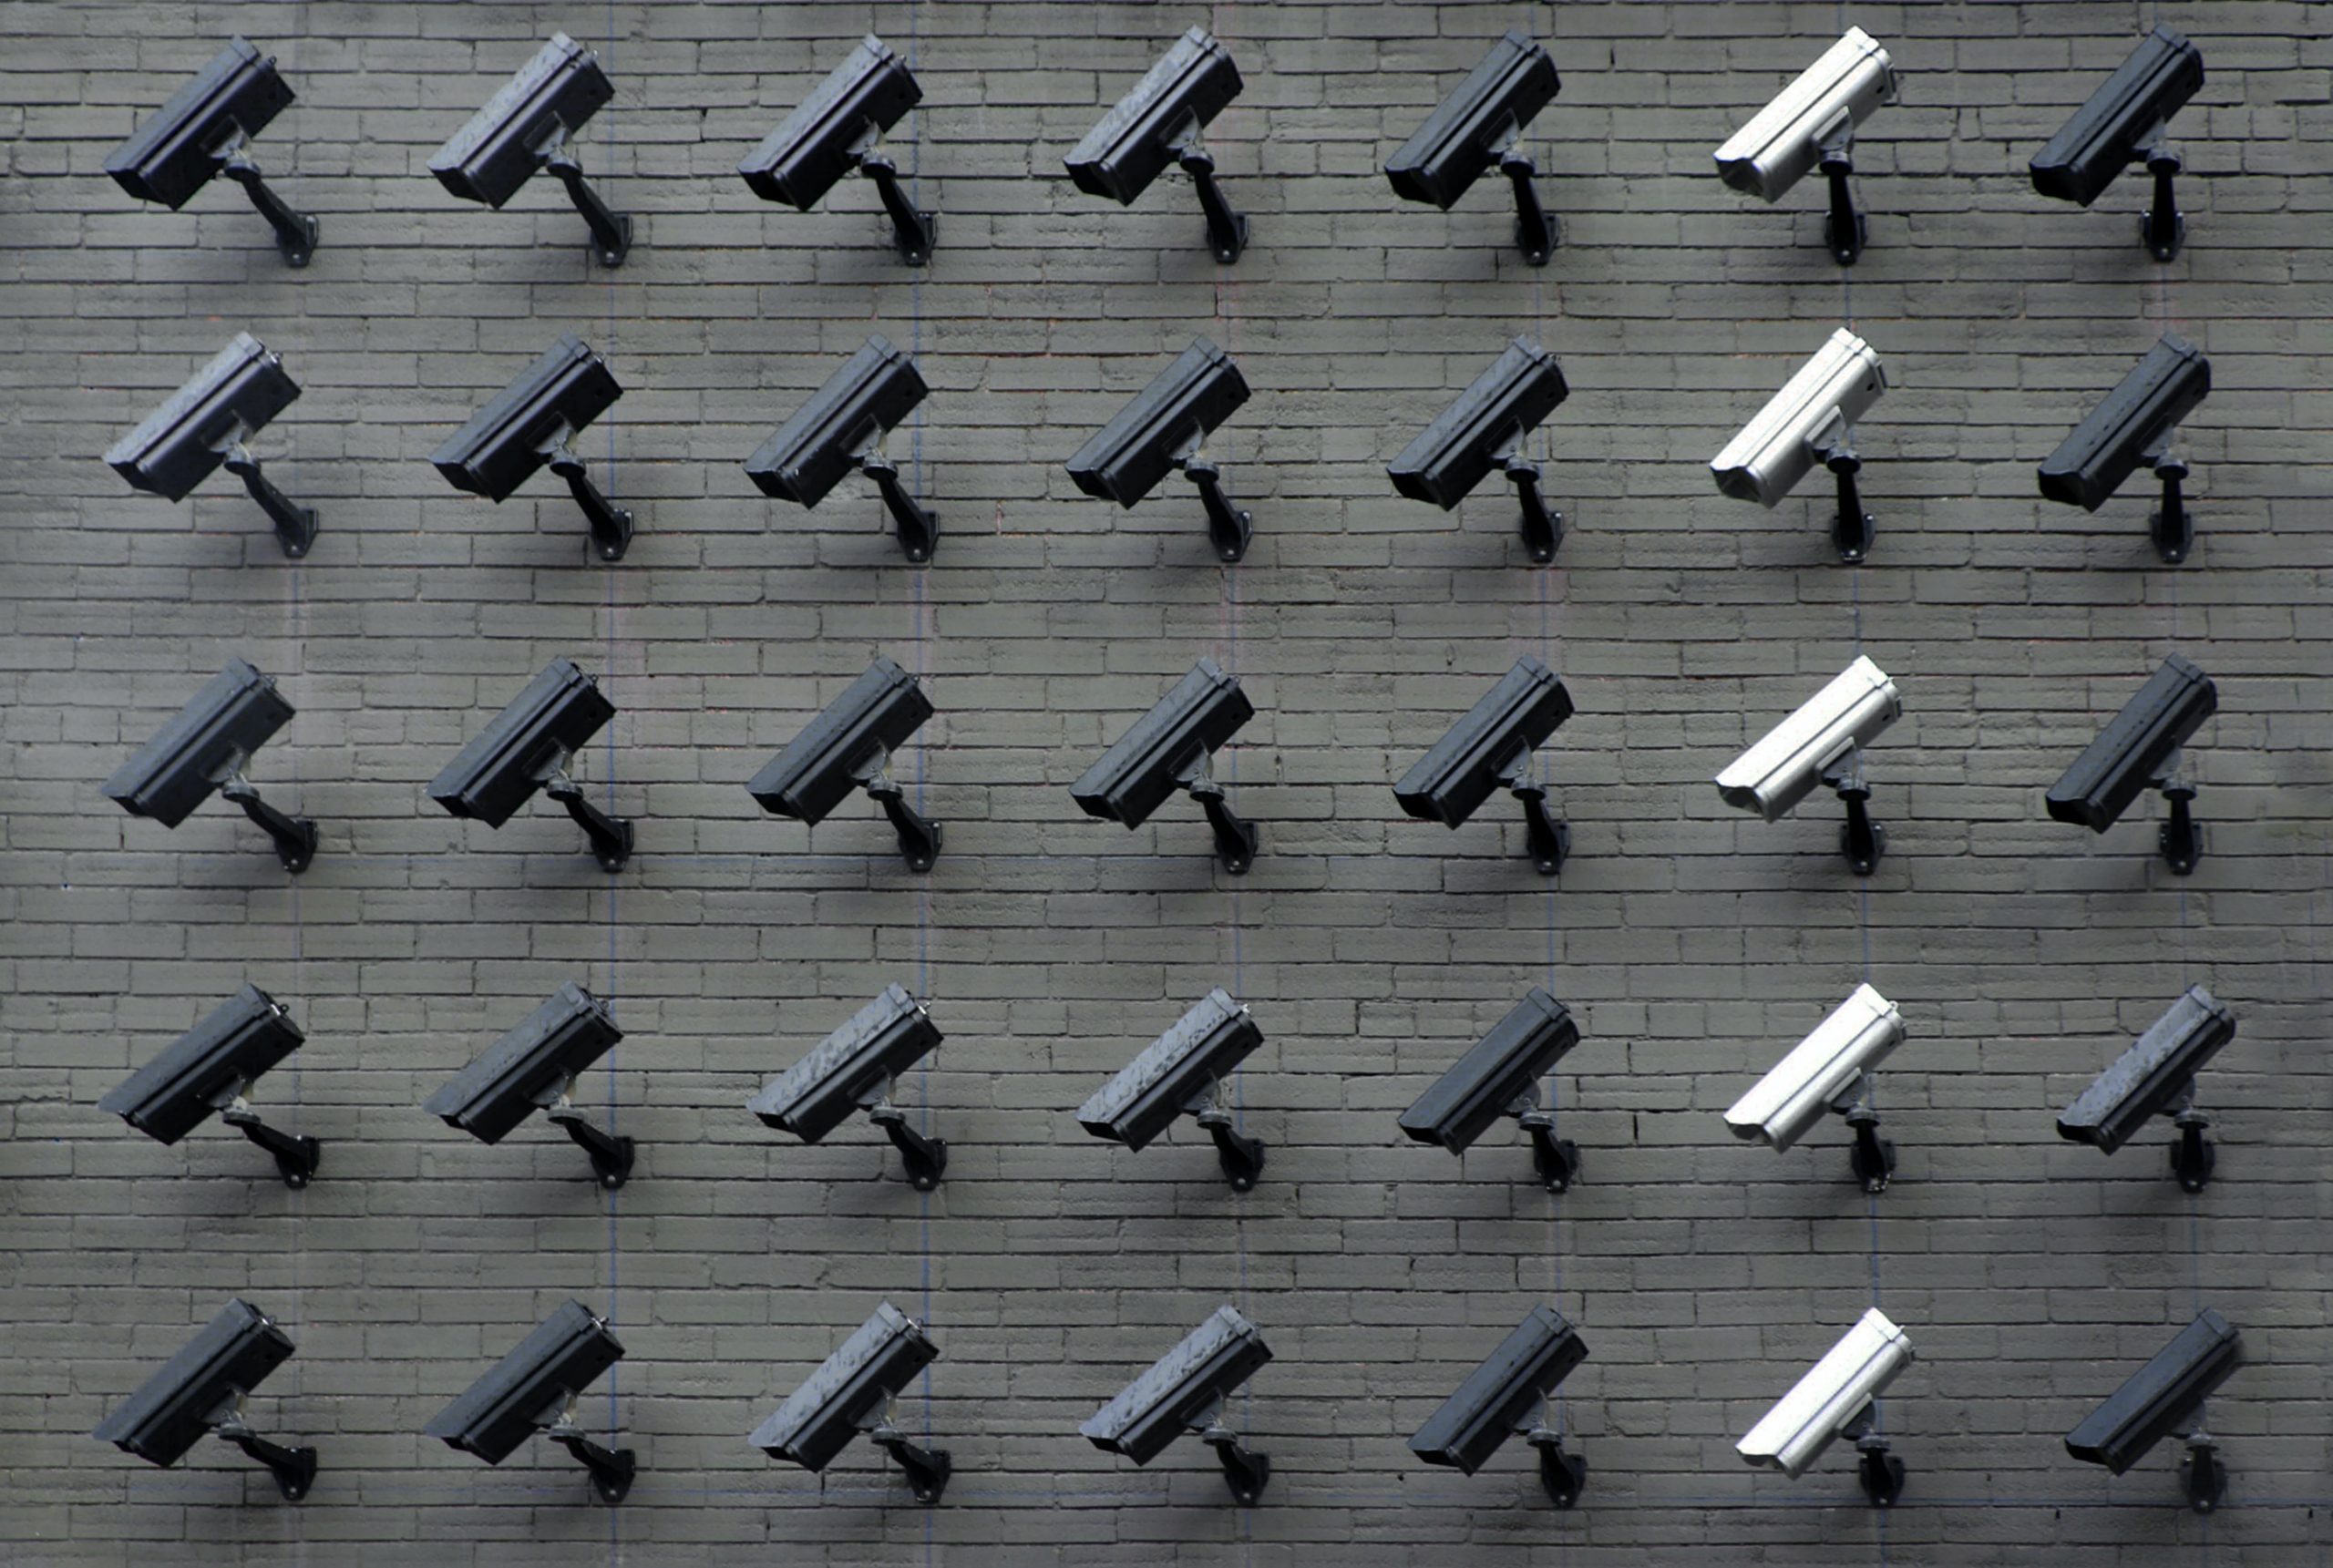 Who’s watching? Denmark’s uncovered surveillance